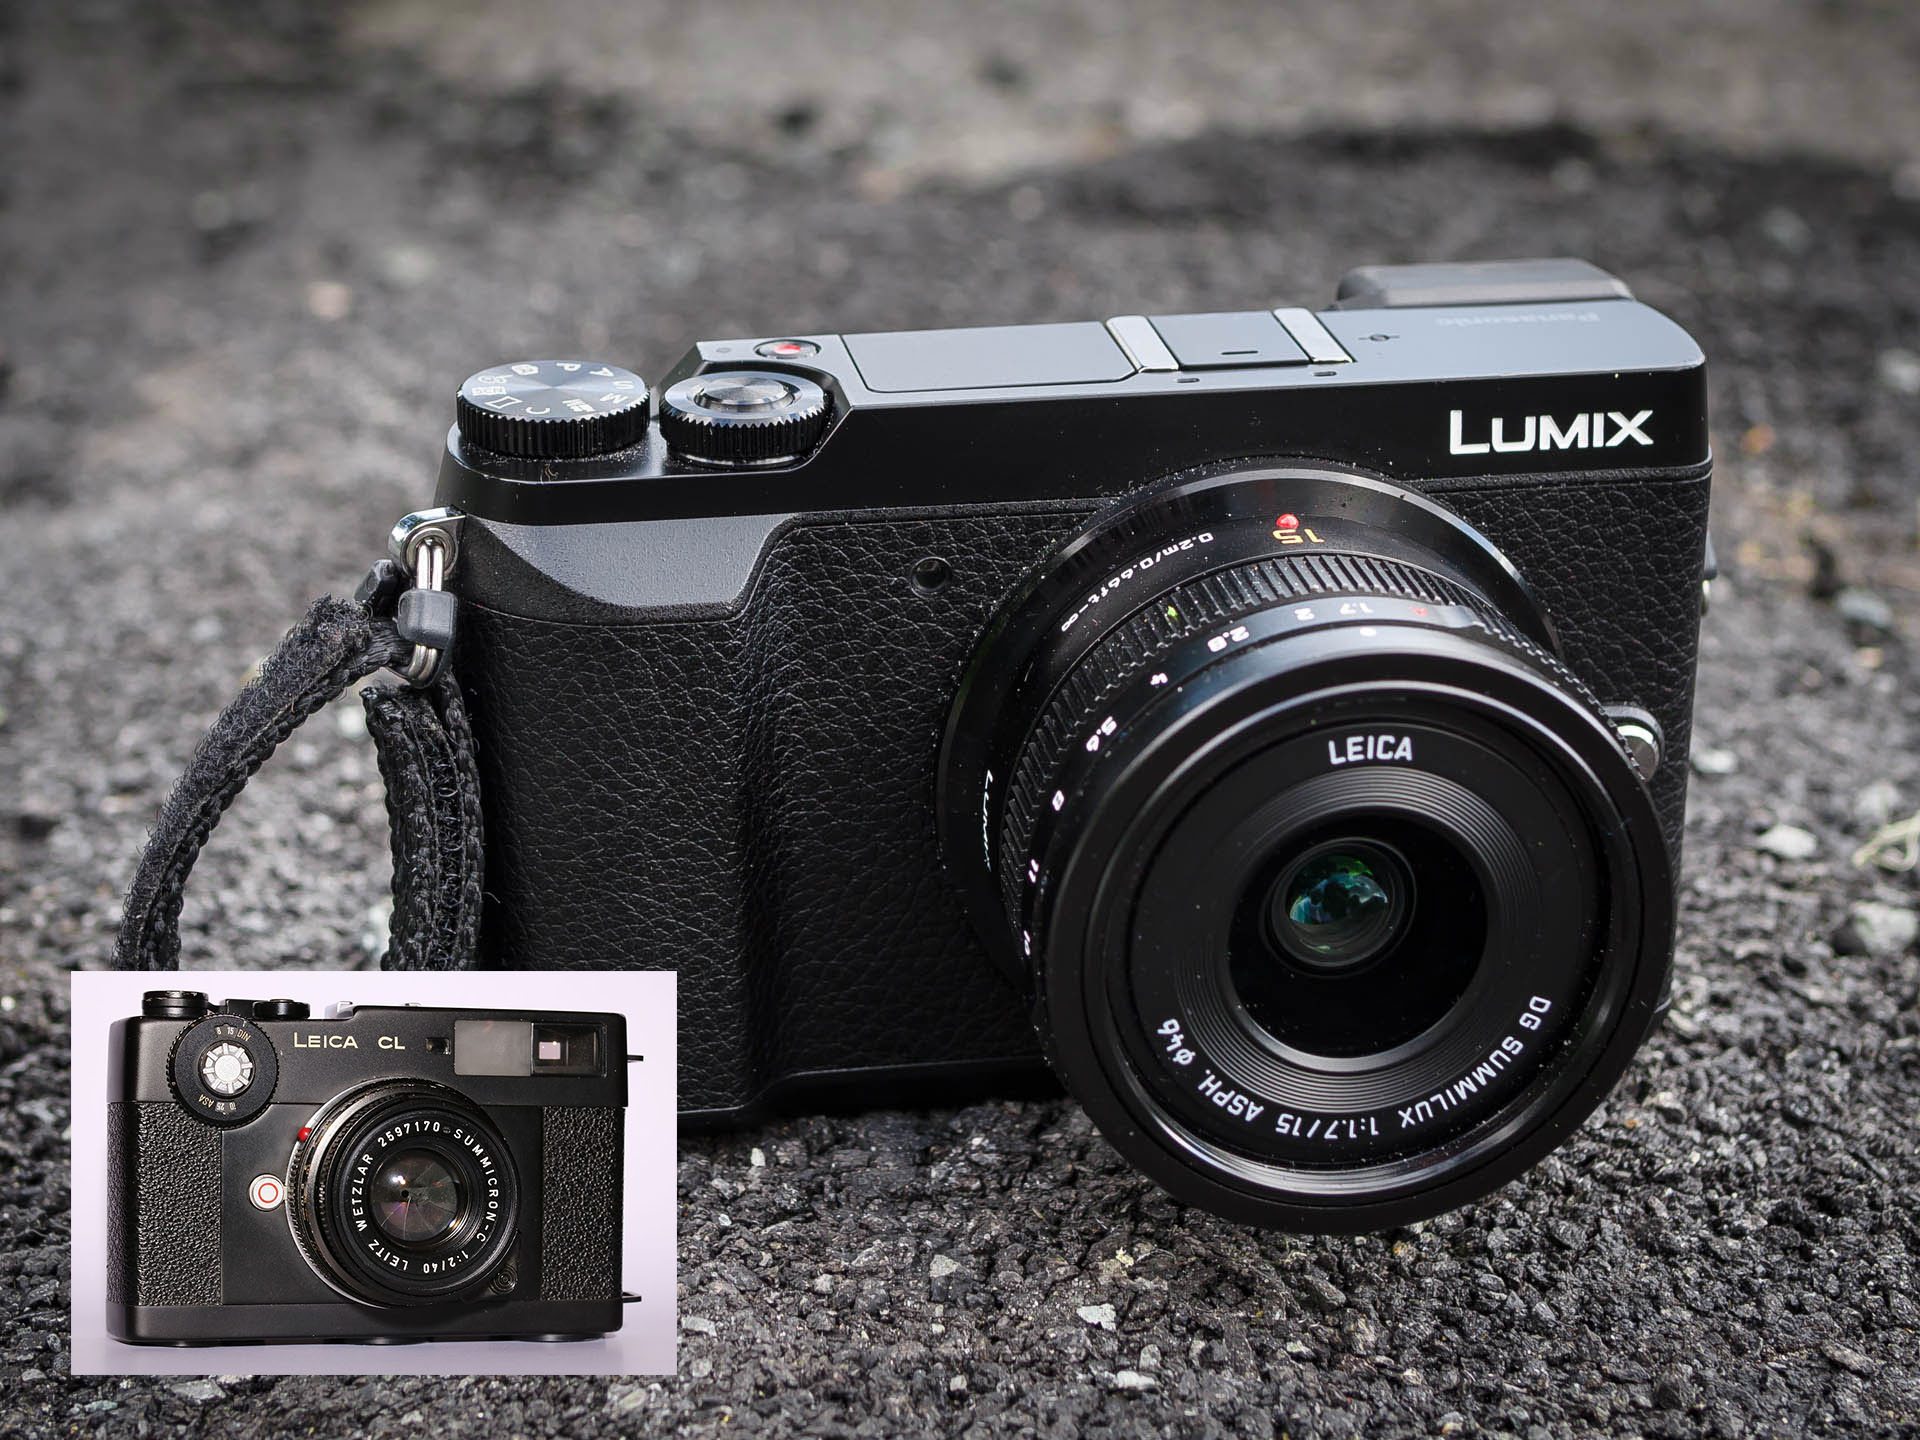 The LUMIX GX8 and in London By Thomas Ludwig | Steve Photo